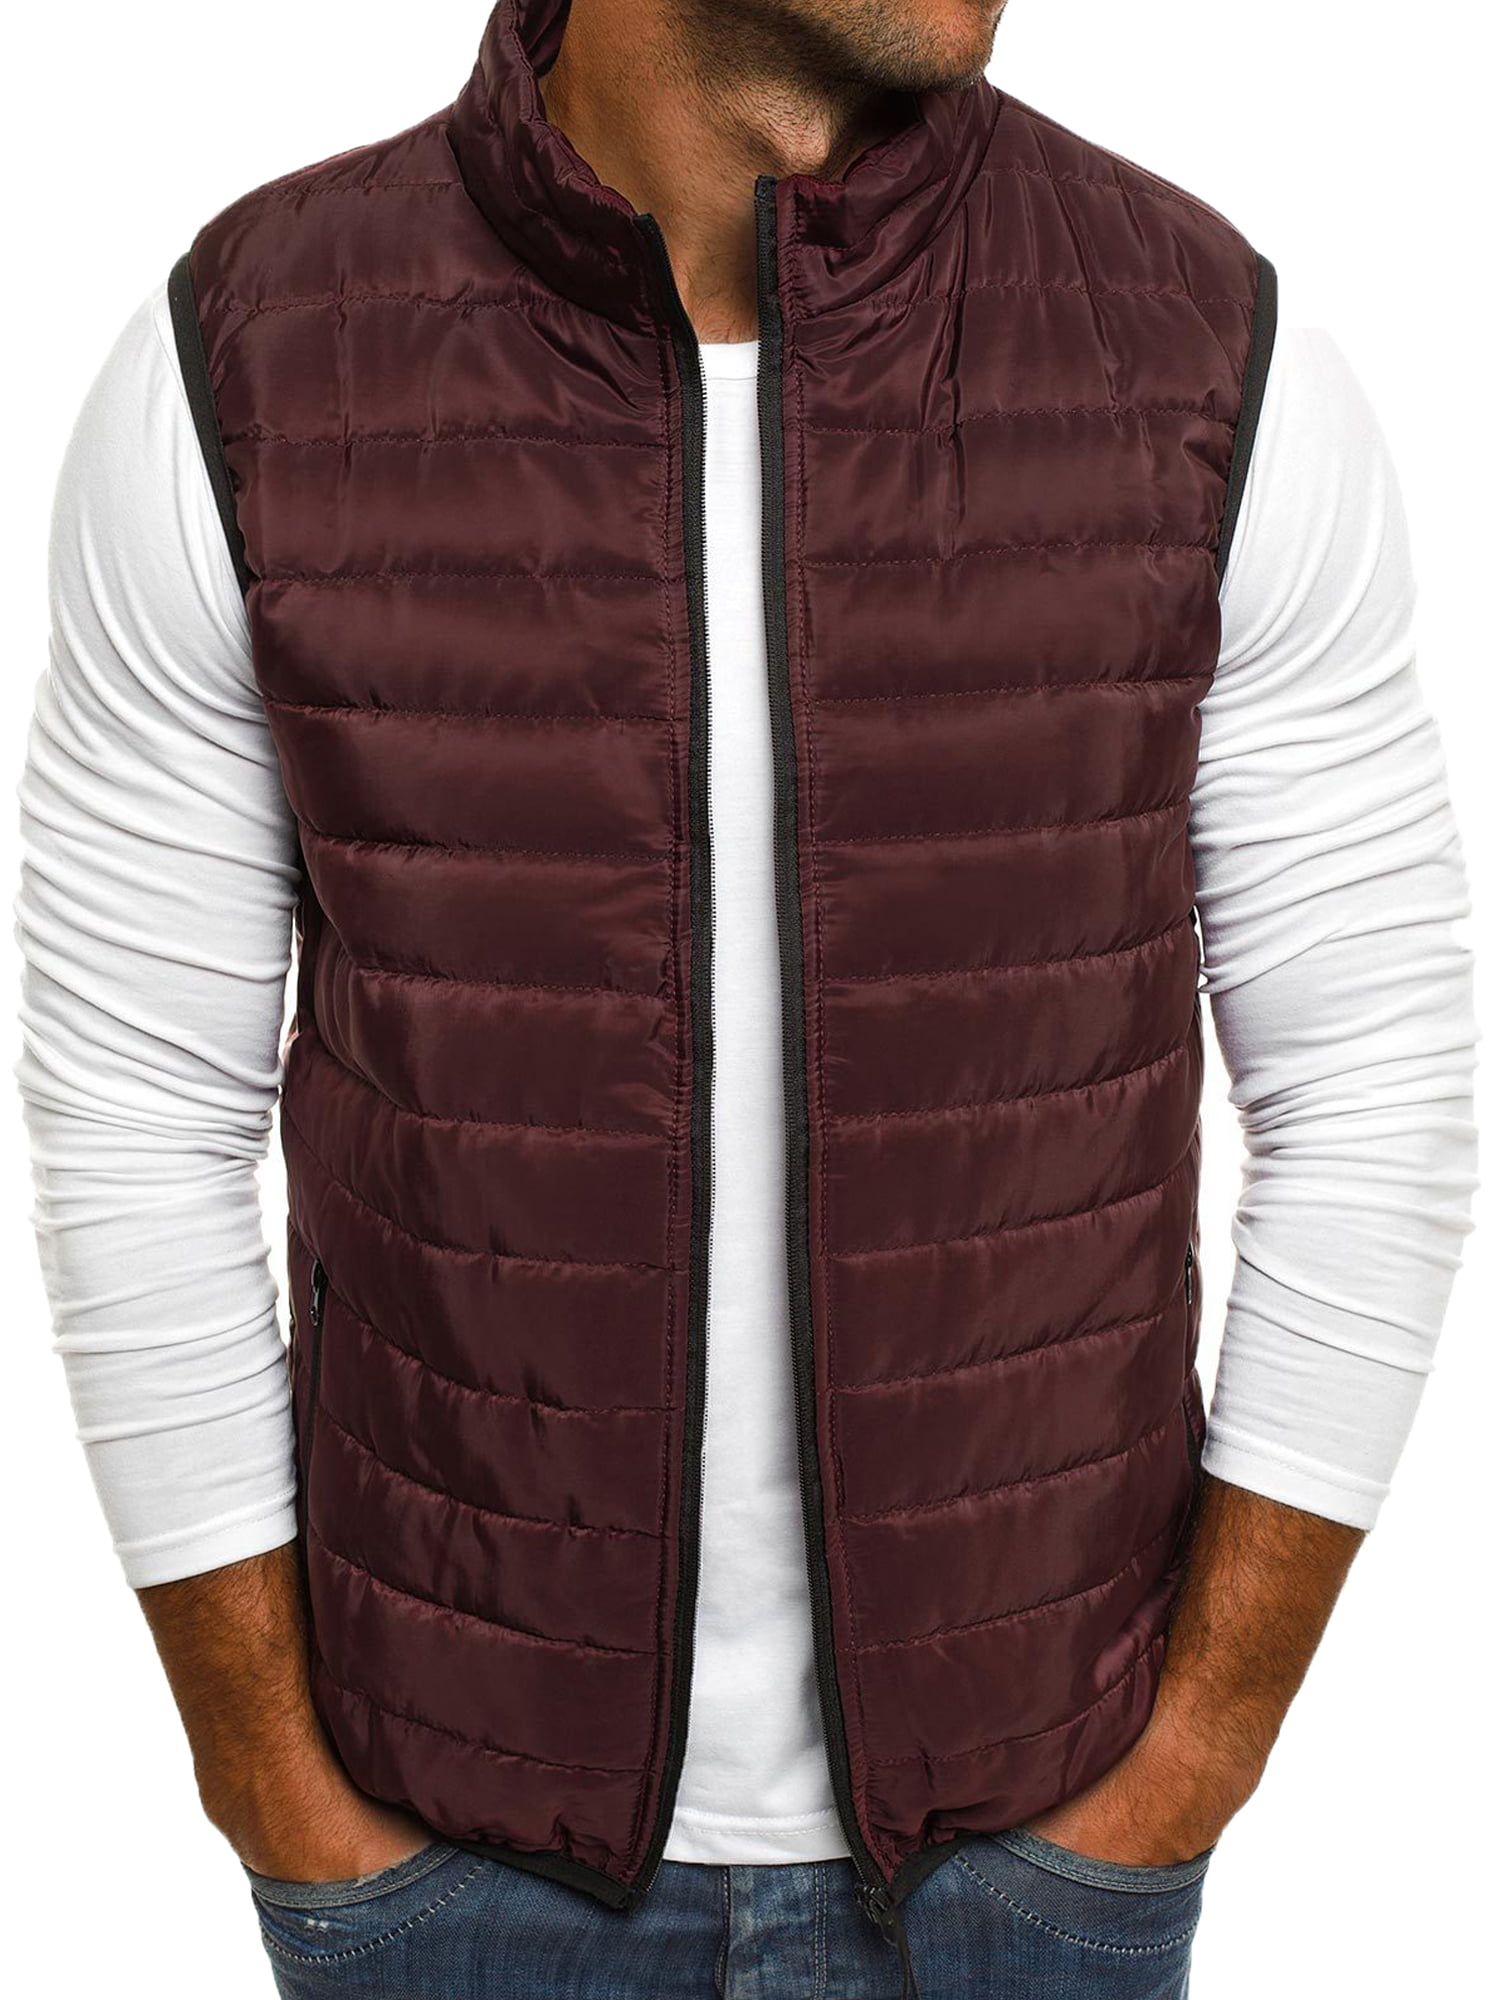 Men Faux Leather Sleeveless Quilted Jacket Fur Lined Sherpa Vest Waistcoat Gilet